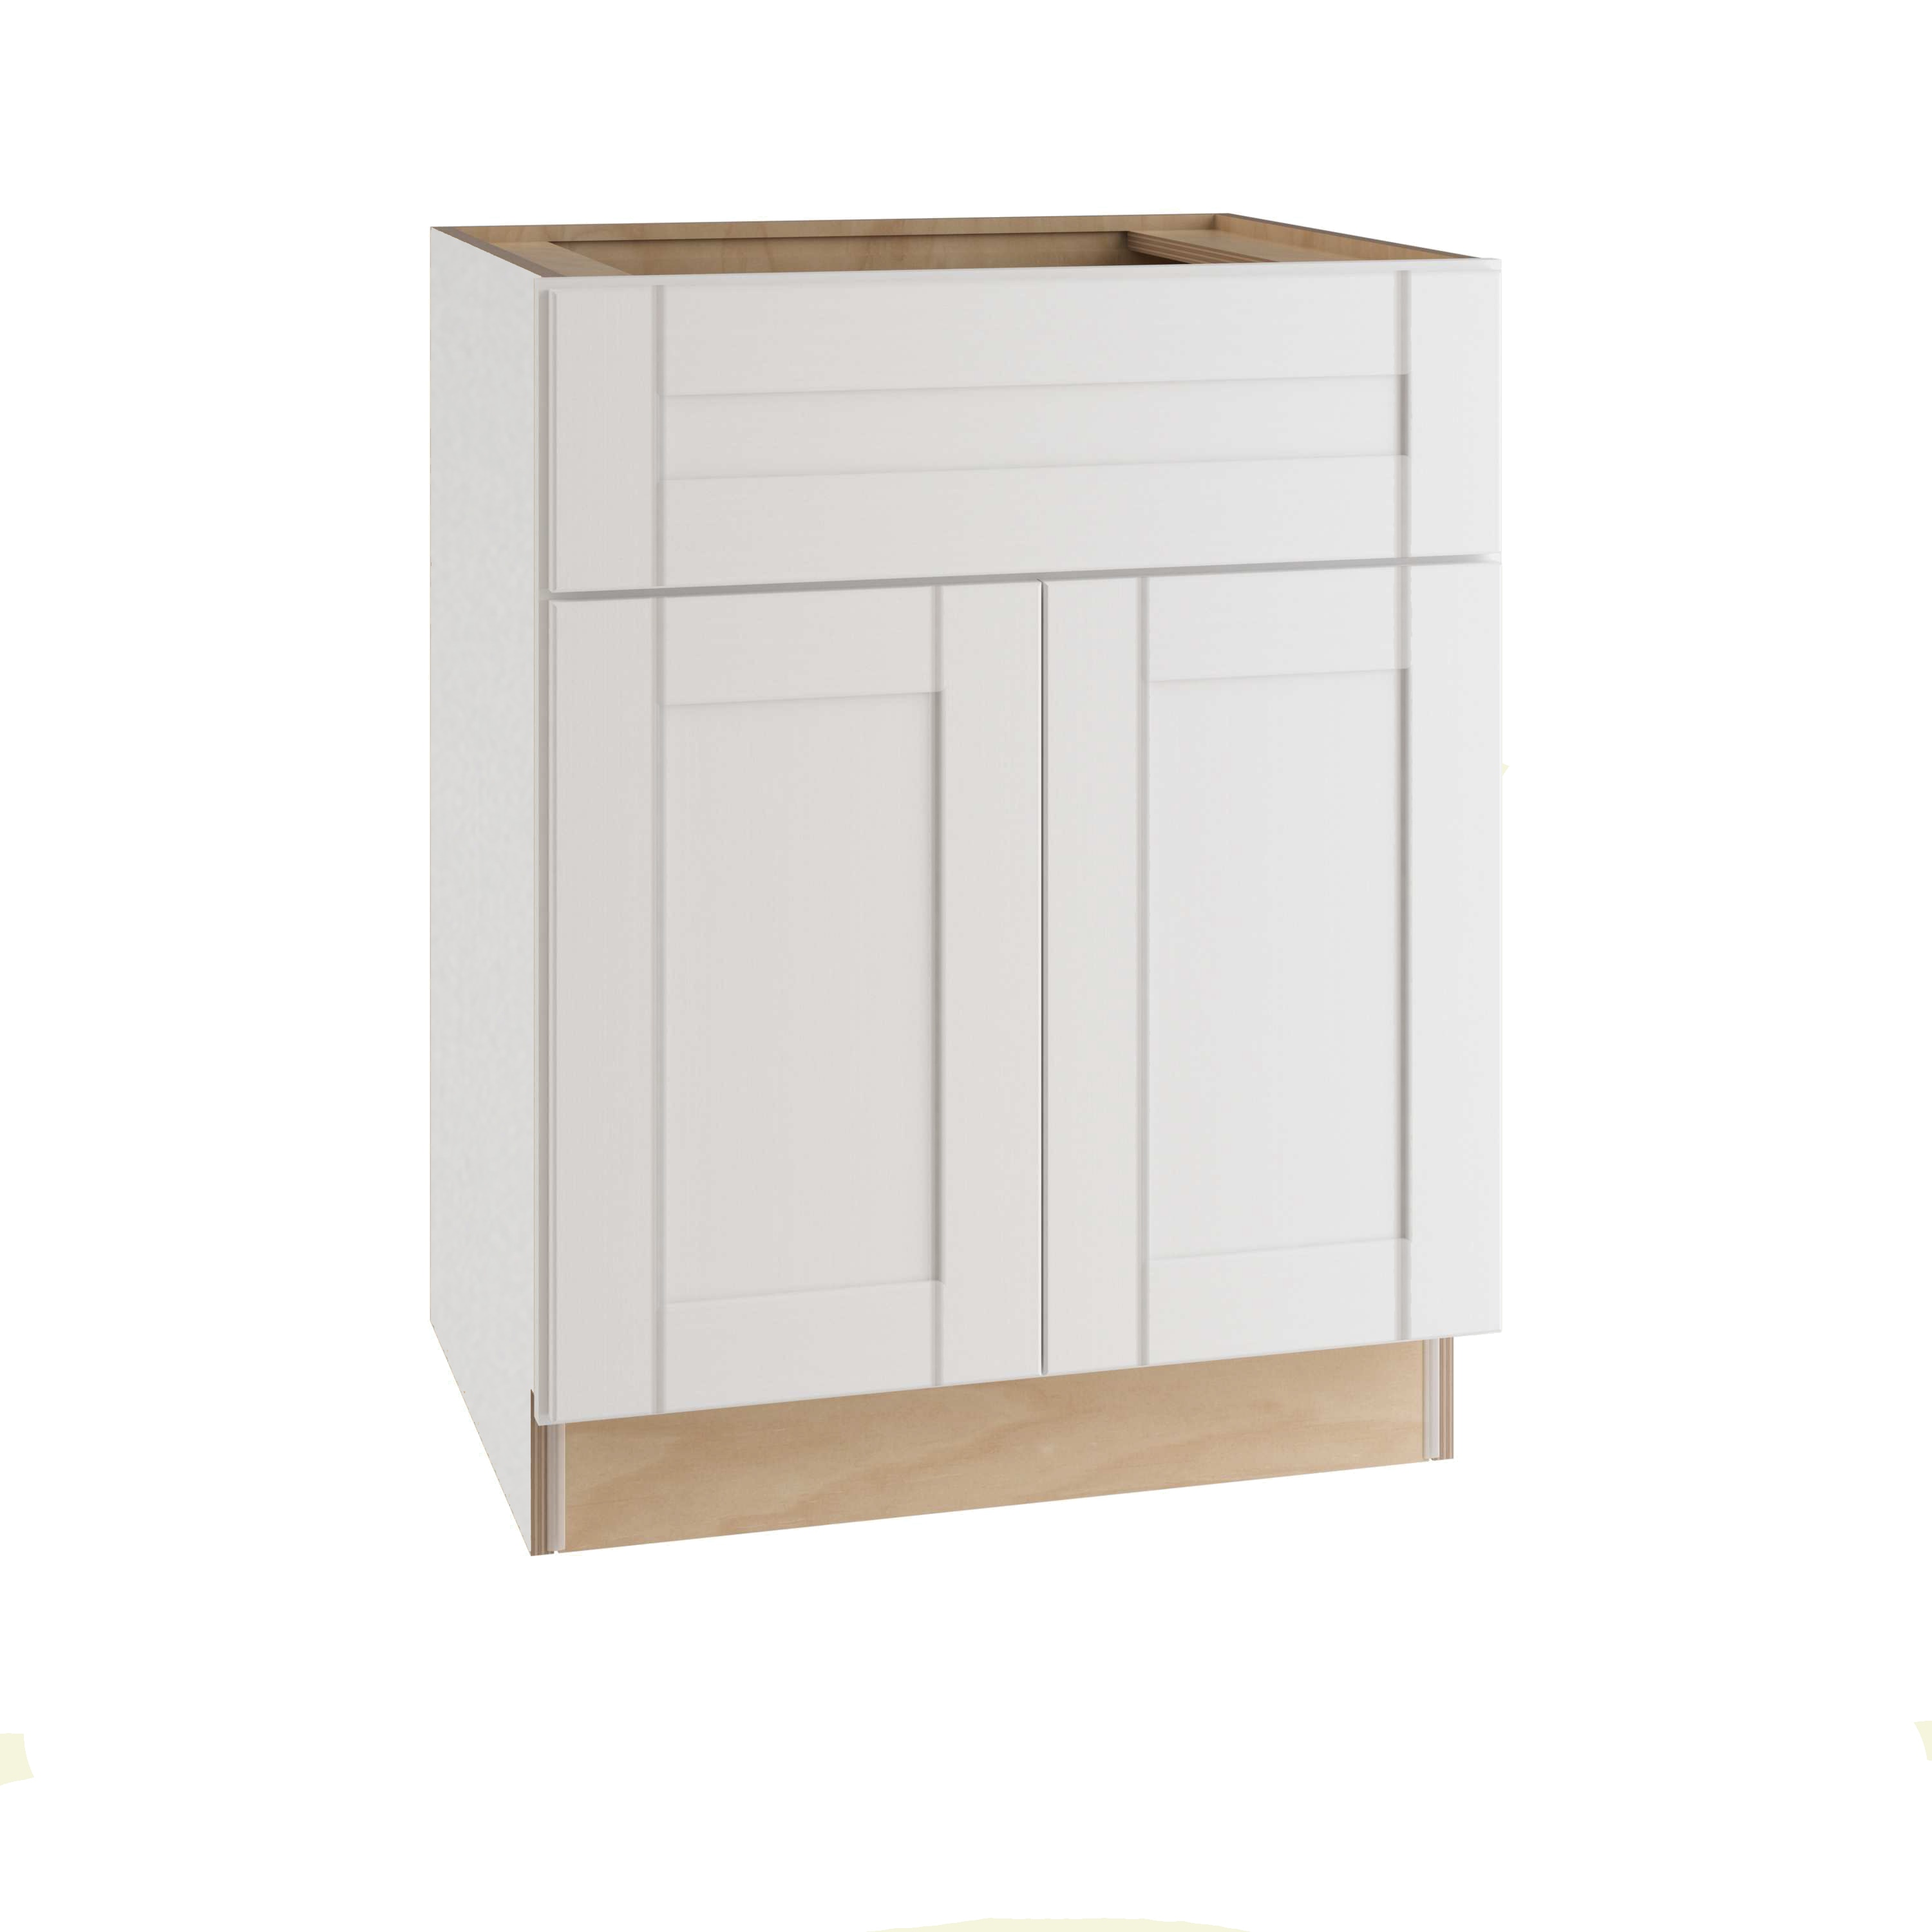 Have a question about Hampton Bay Shaker 30 in. W x 24 in. D x